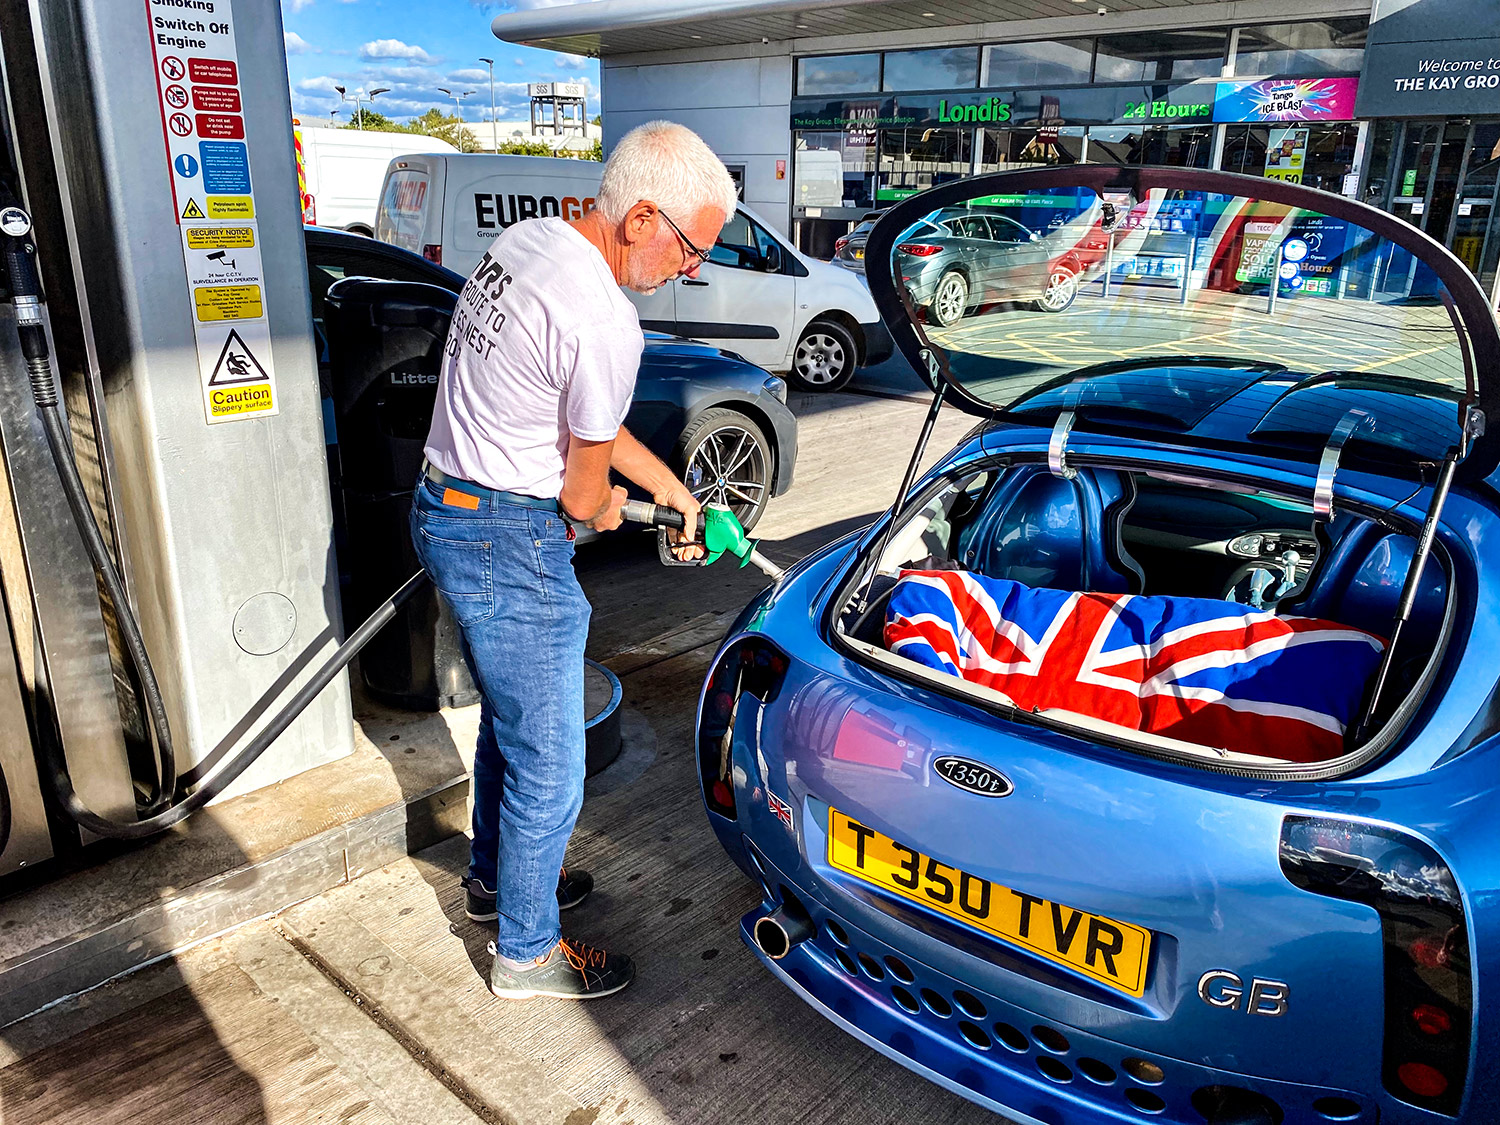 TVR T350 in Kent Being Refuelled